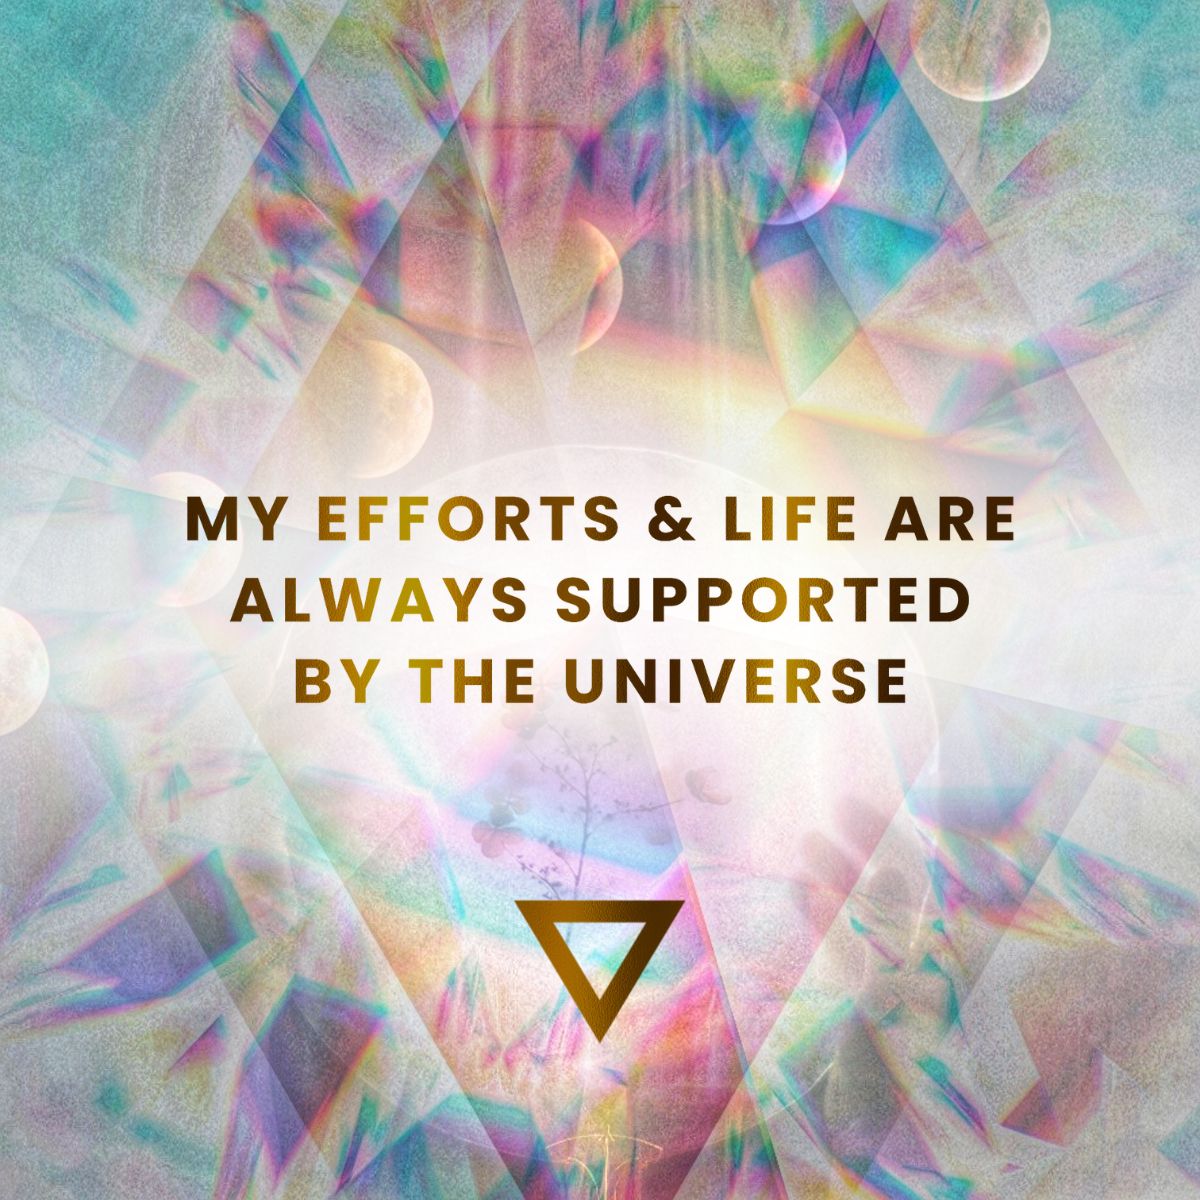 My Efforts & Life are Always Supported by the Universe